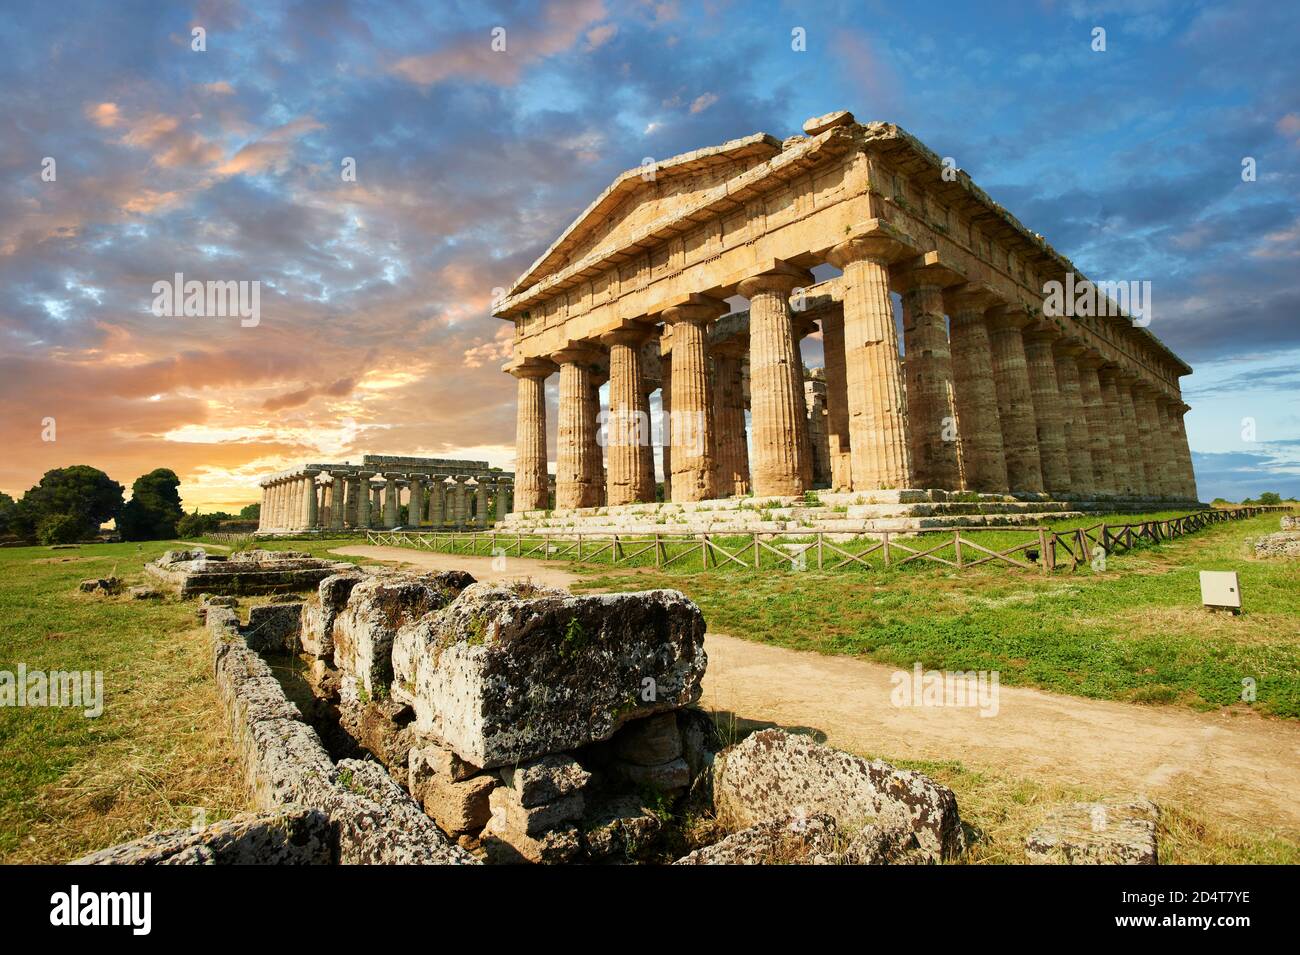 The ancient Doric Greek Temple of Hera of Paestum  built in about 460–450 BC. Paestum archaeological site, Italy. Stock Photo